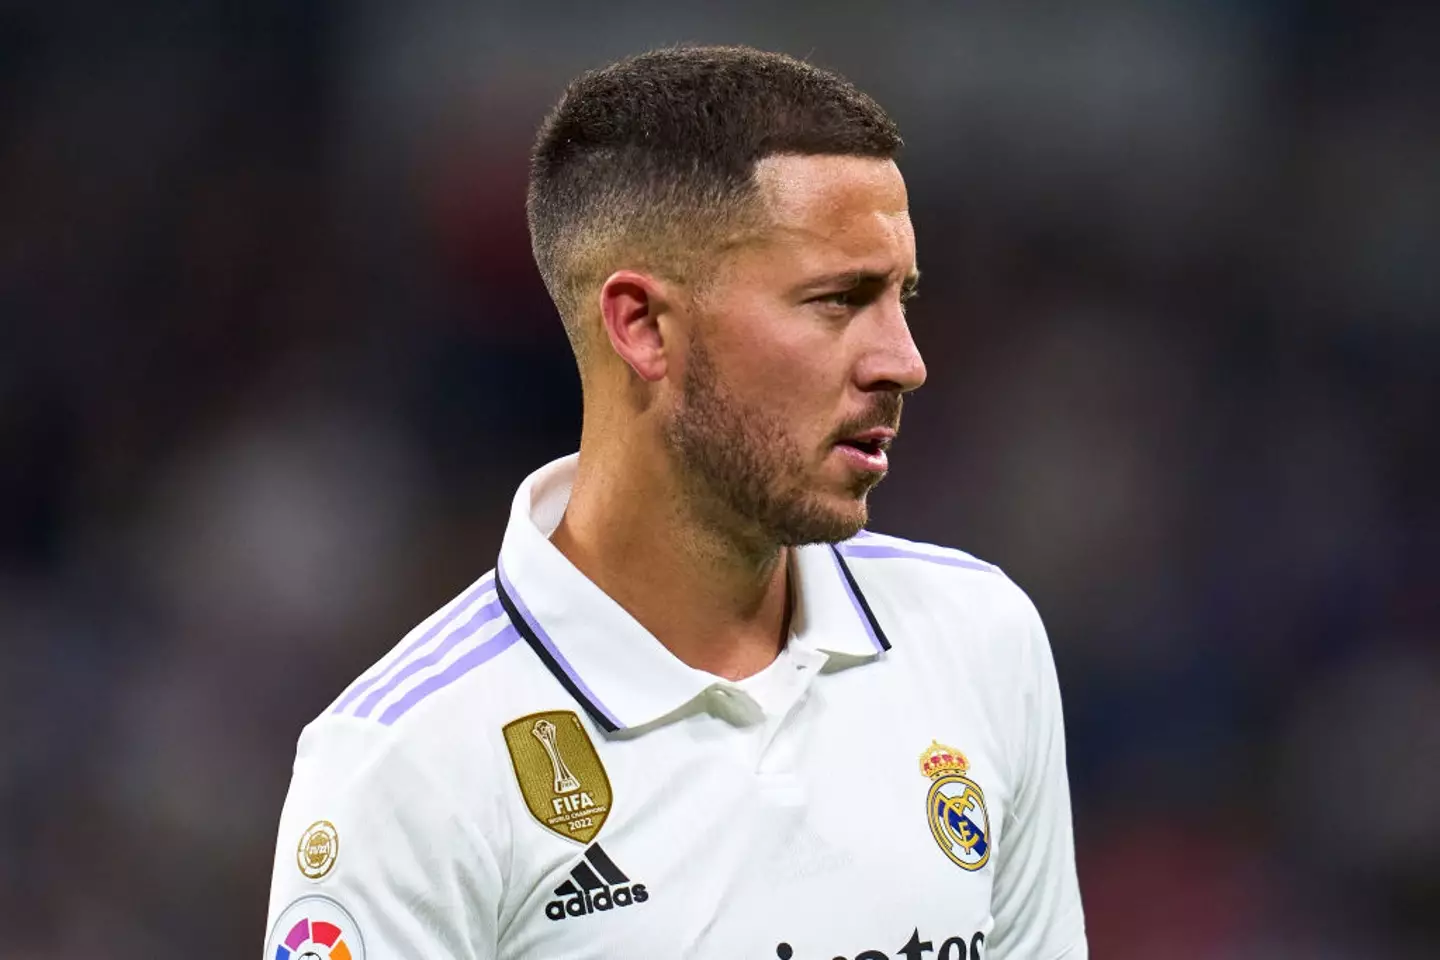 Eden Hazard failed to live up to expectations at Real Madrid (Image: Getty)